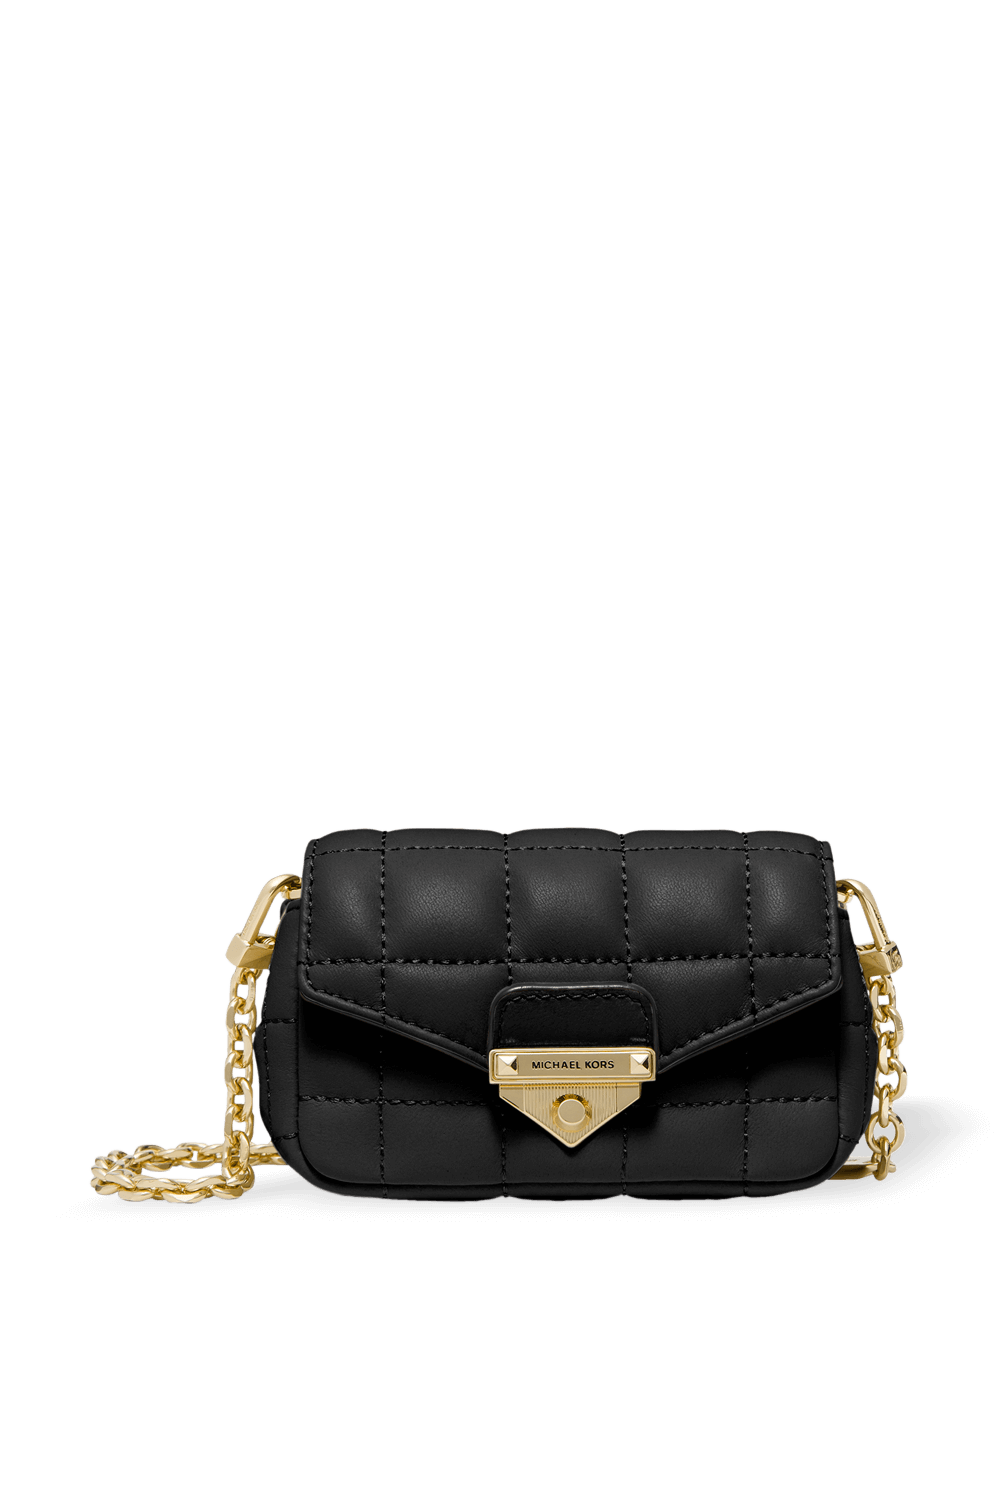 Soho Quilted Leather Bag Charm in Black MICHAEL KORS